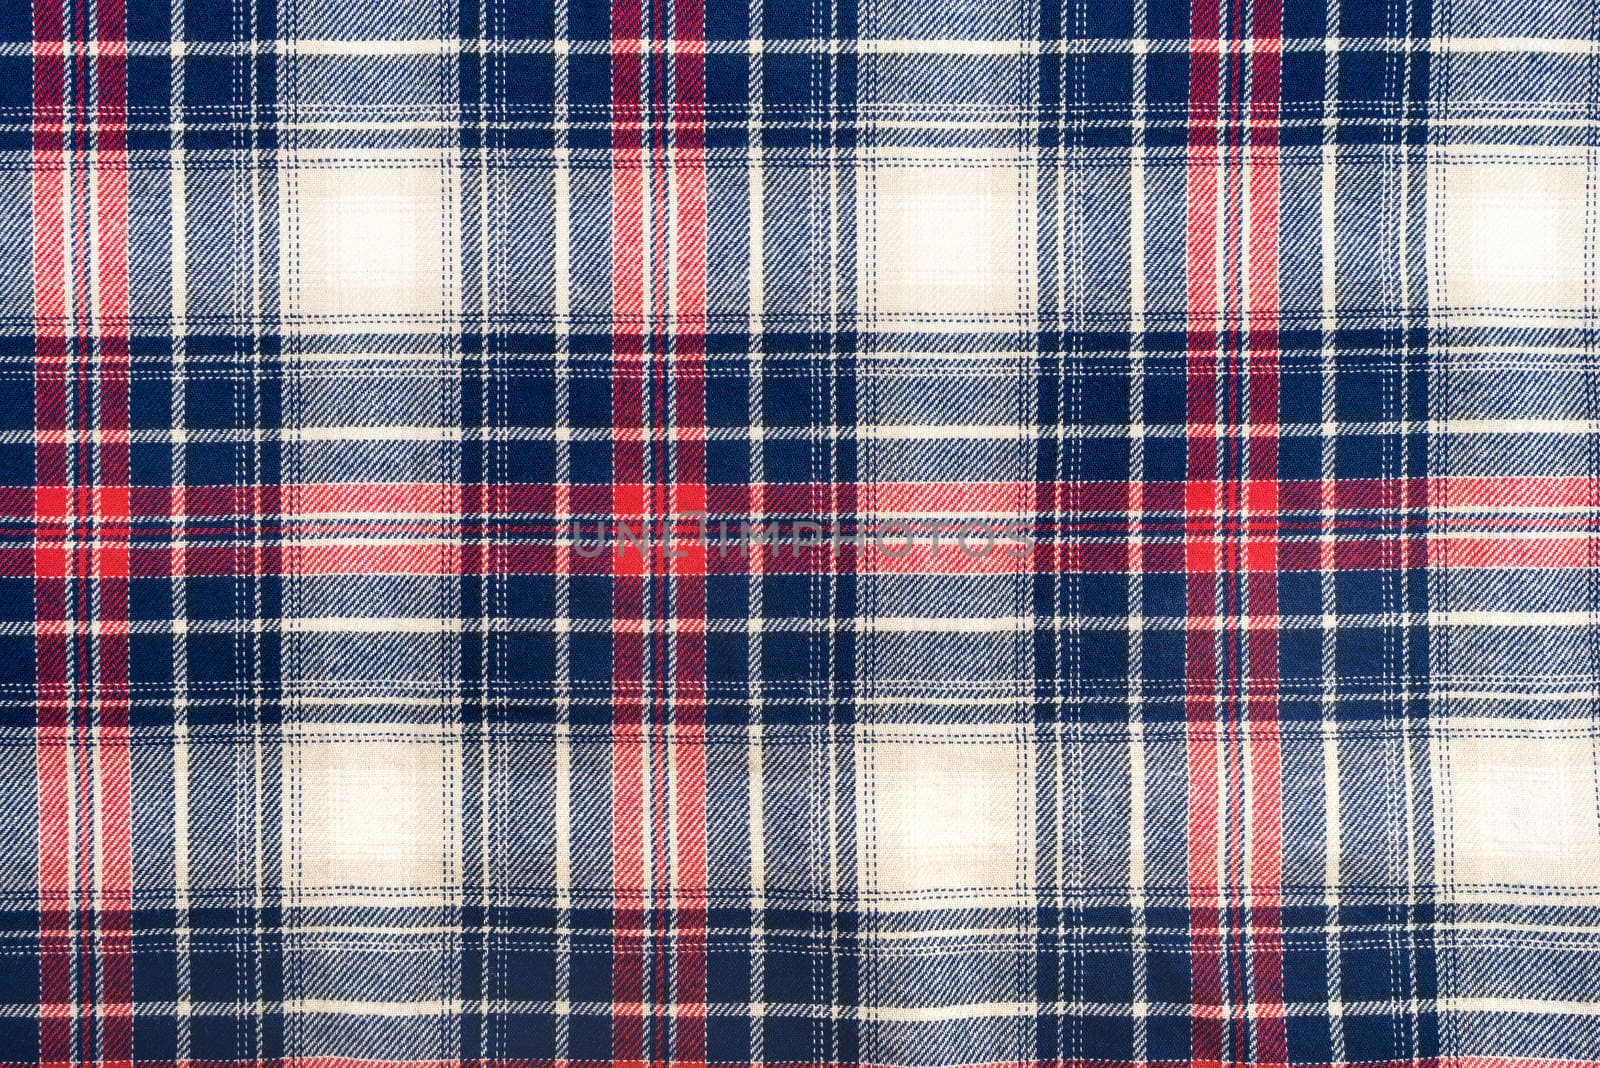 squared textile texture for background